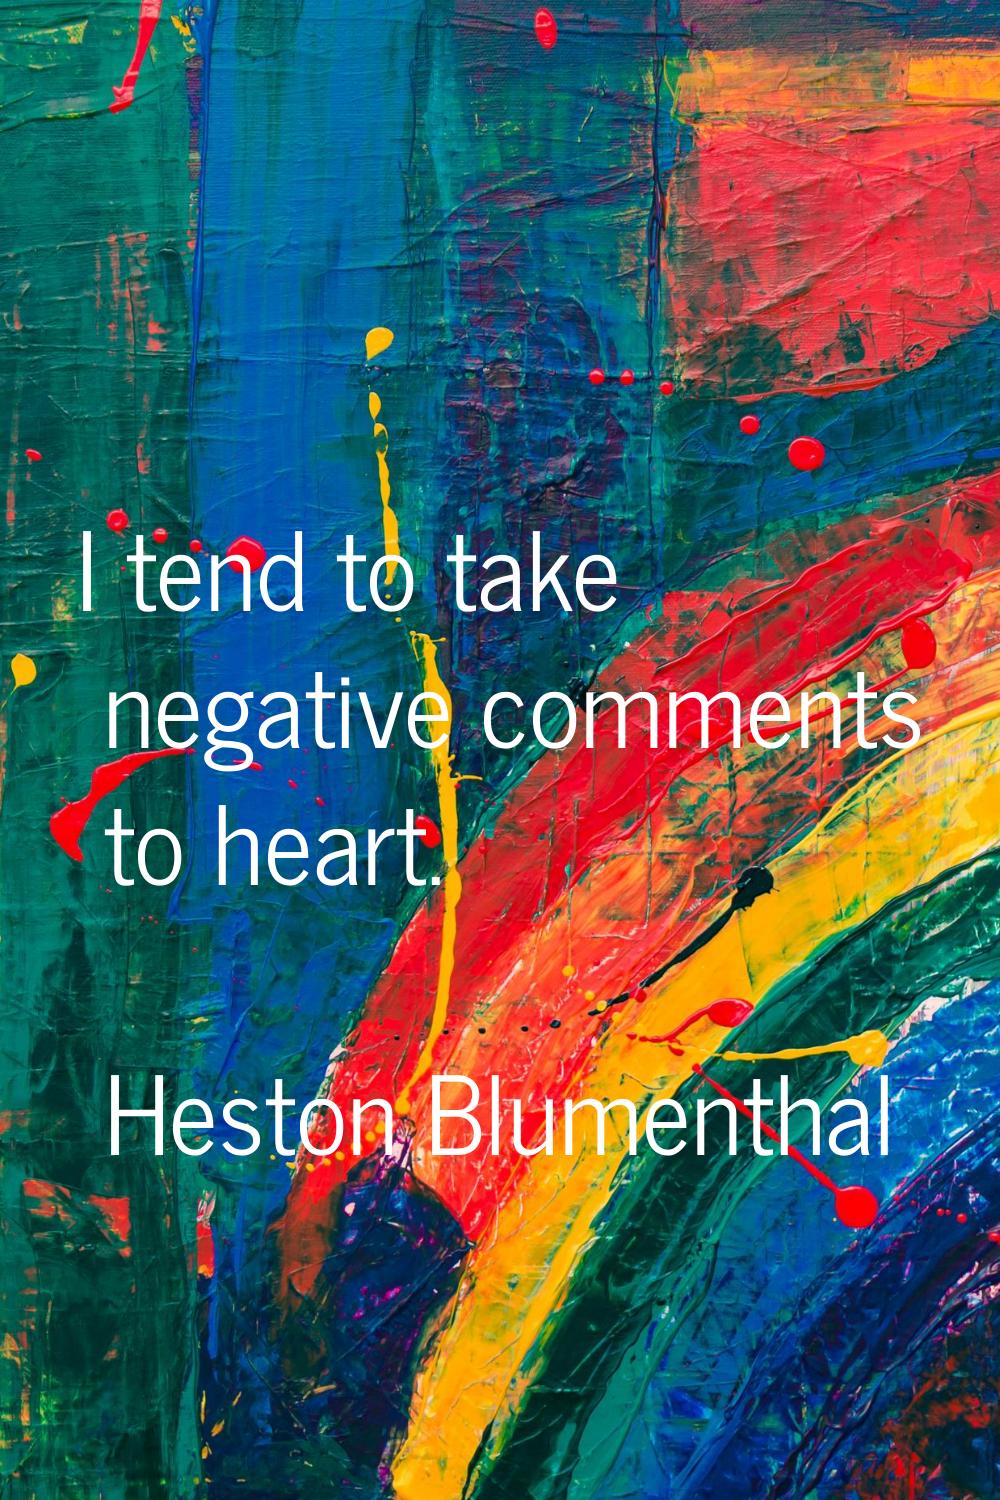 I tend to take negative comments to heart.